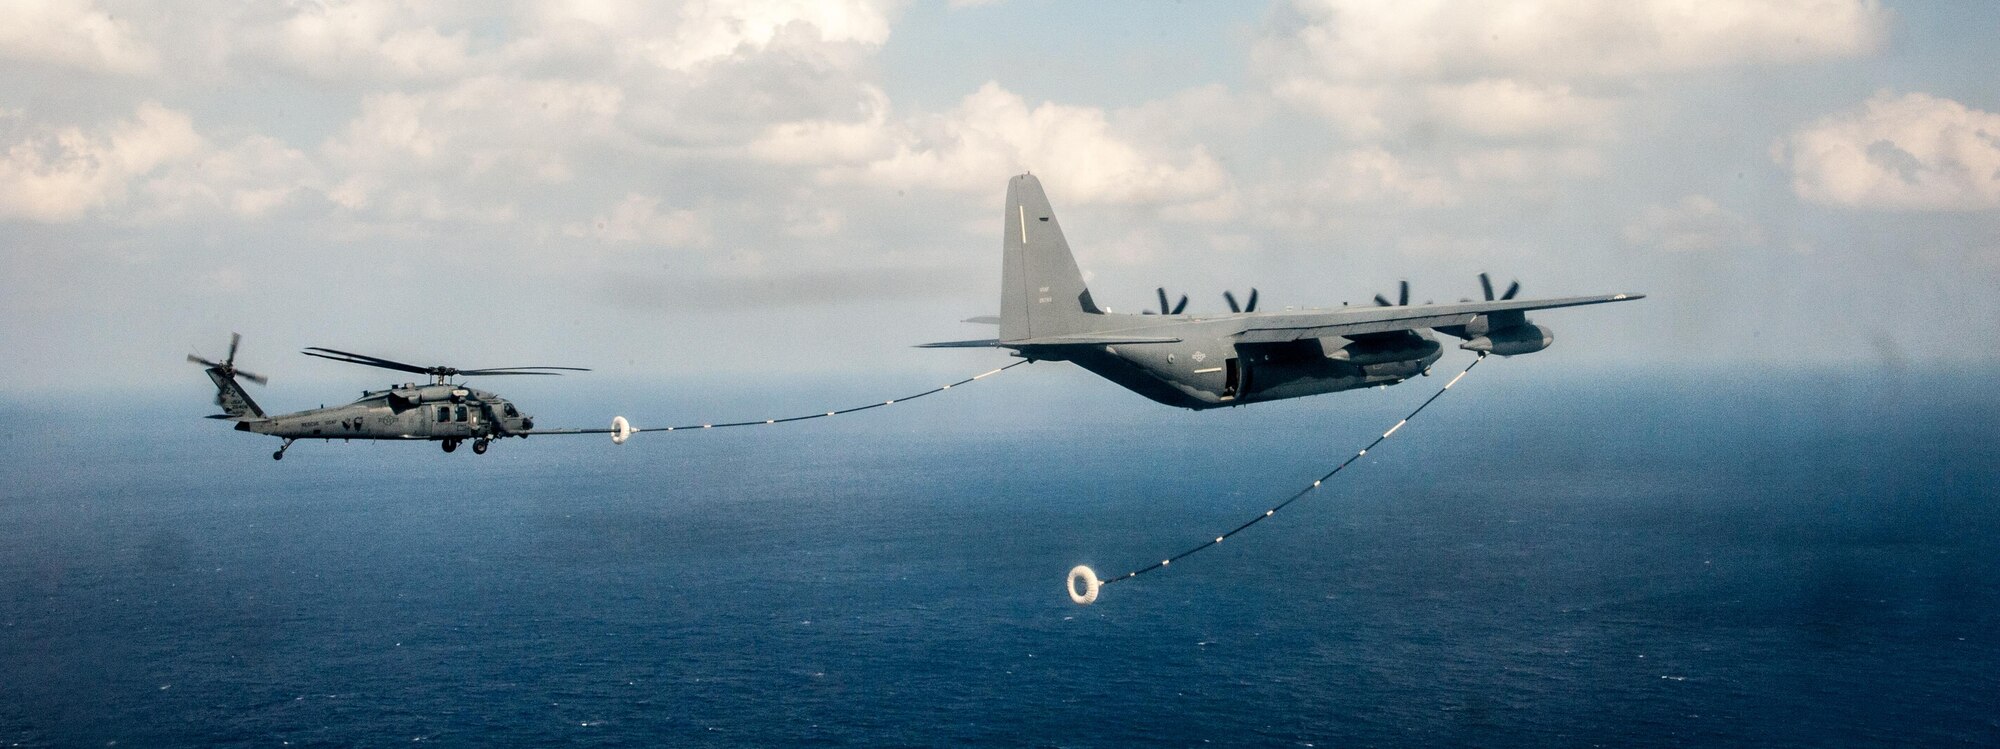 A U.S. Air Force HH-60G Pave Hawk helicopter assigned to the 33rd Rescue Squadron performs in-flight refueling with a MC-130J Commando II from the 17th Special Operations Squadron during a training exercise Nov. 4, 2016, off the coast of Okinawa, Japan. The 33rd RS performs military personnel recovery, civil search and rescue, medical evacuation, disaster response, and humanitarian assistance. (U.S. Air Force photo by Senior Airman John Linzmeier)